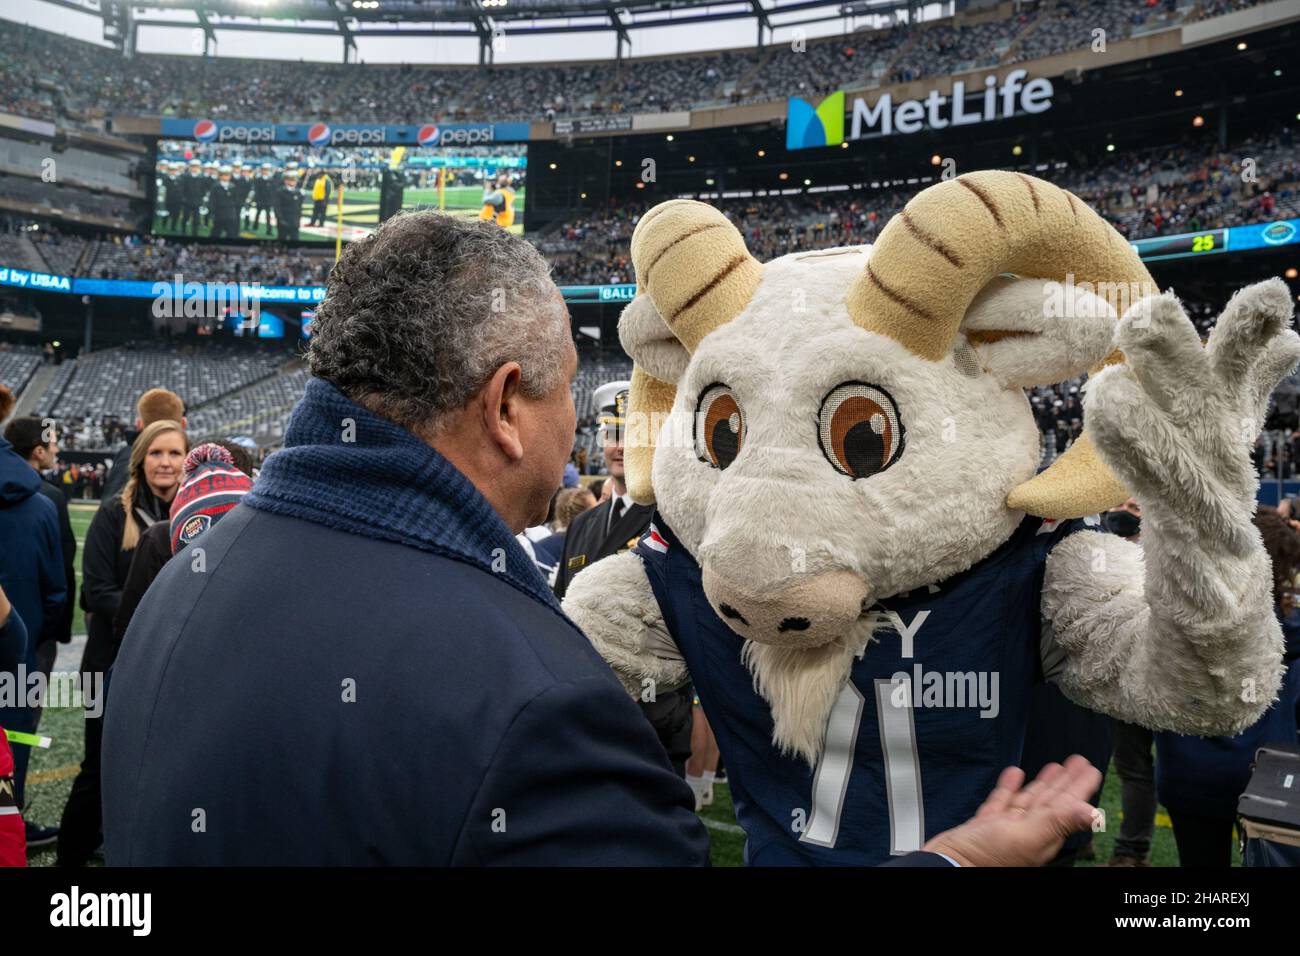 East Rutherford, United States of America. 11 December, 2021. U.S. Secretary of the Navy Carlos Del Toro cheers on the crowd with Naval Academy costumed mascot Bill the Goat, during the start of the annual Army-Navy football game at Metlife Stadium December 11, 2021 in East Rutherford, New Jersey. The U.S. Naval Academy Midshipmen defeated the Army Black Knights 17-13 in their 122nd matchup.  Credit: MC2 Logan Keown/U.S. Navy Photo/Alamy Live News Stock Photo